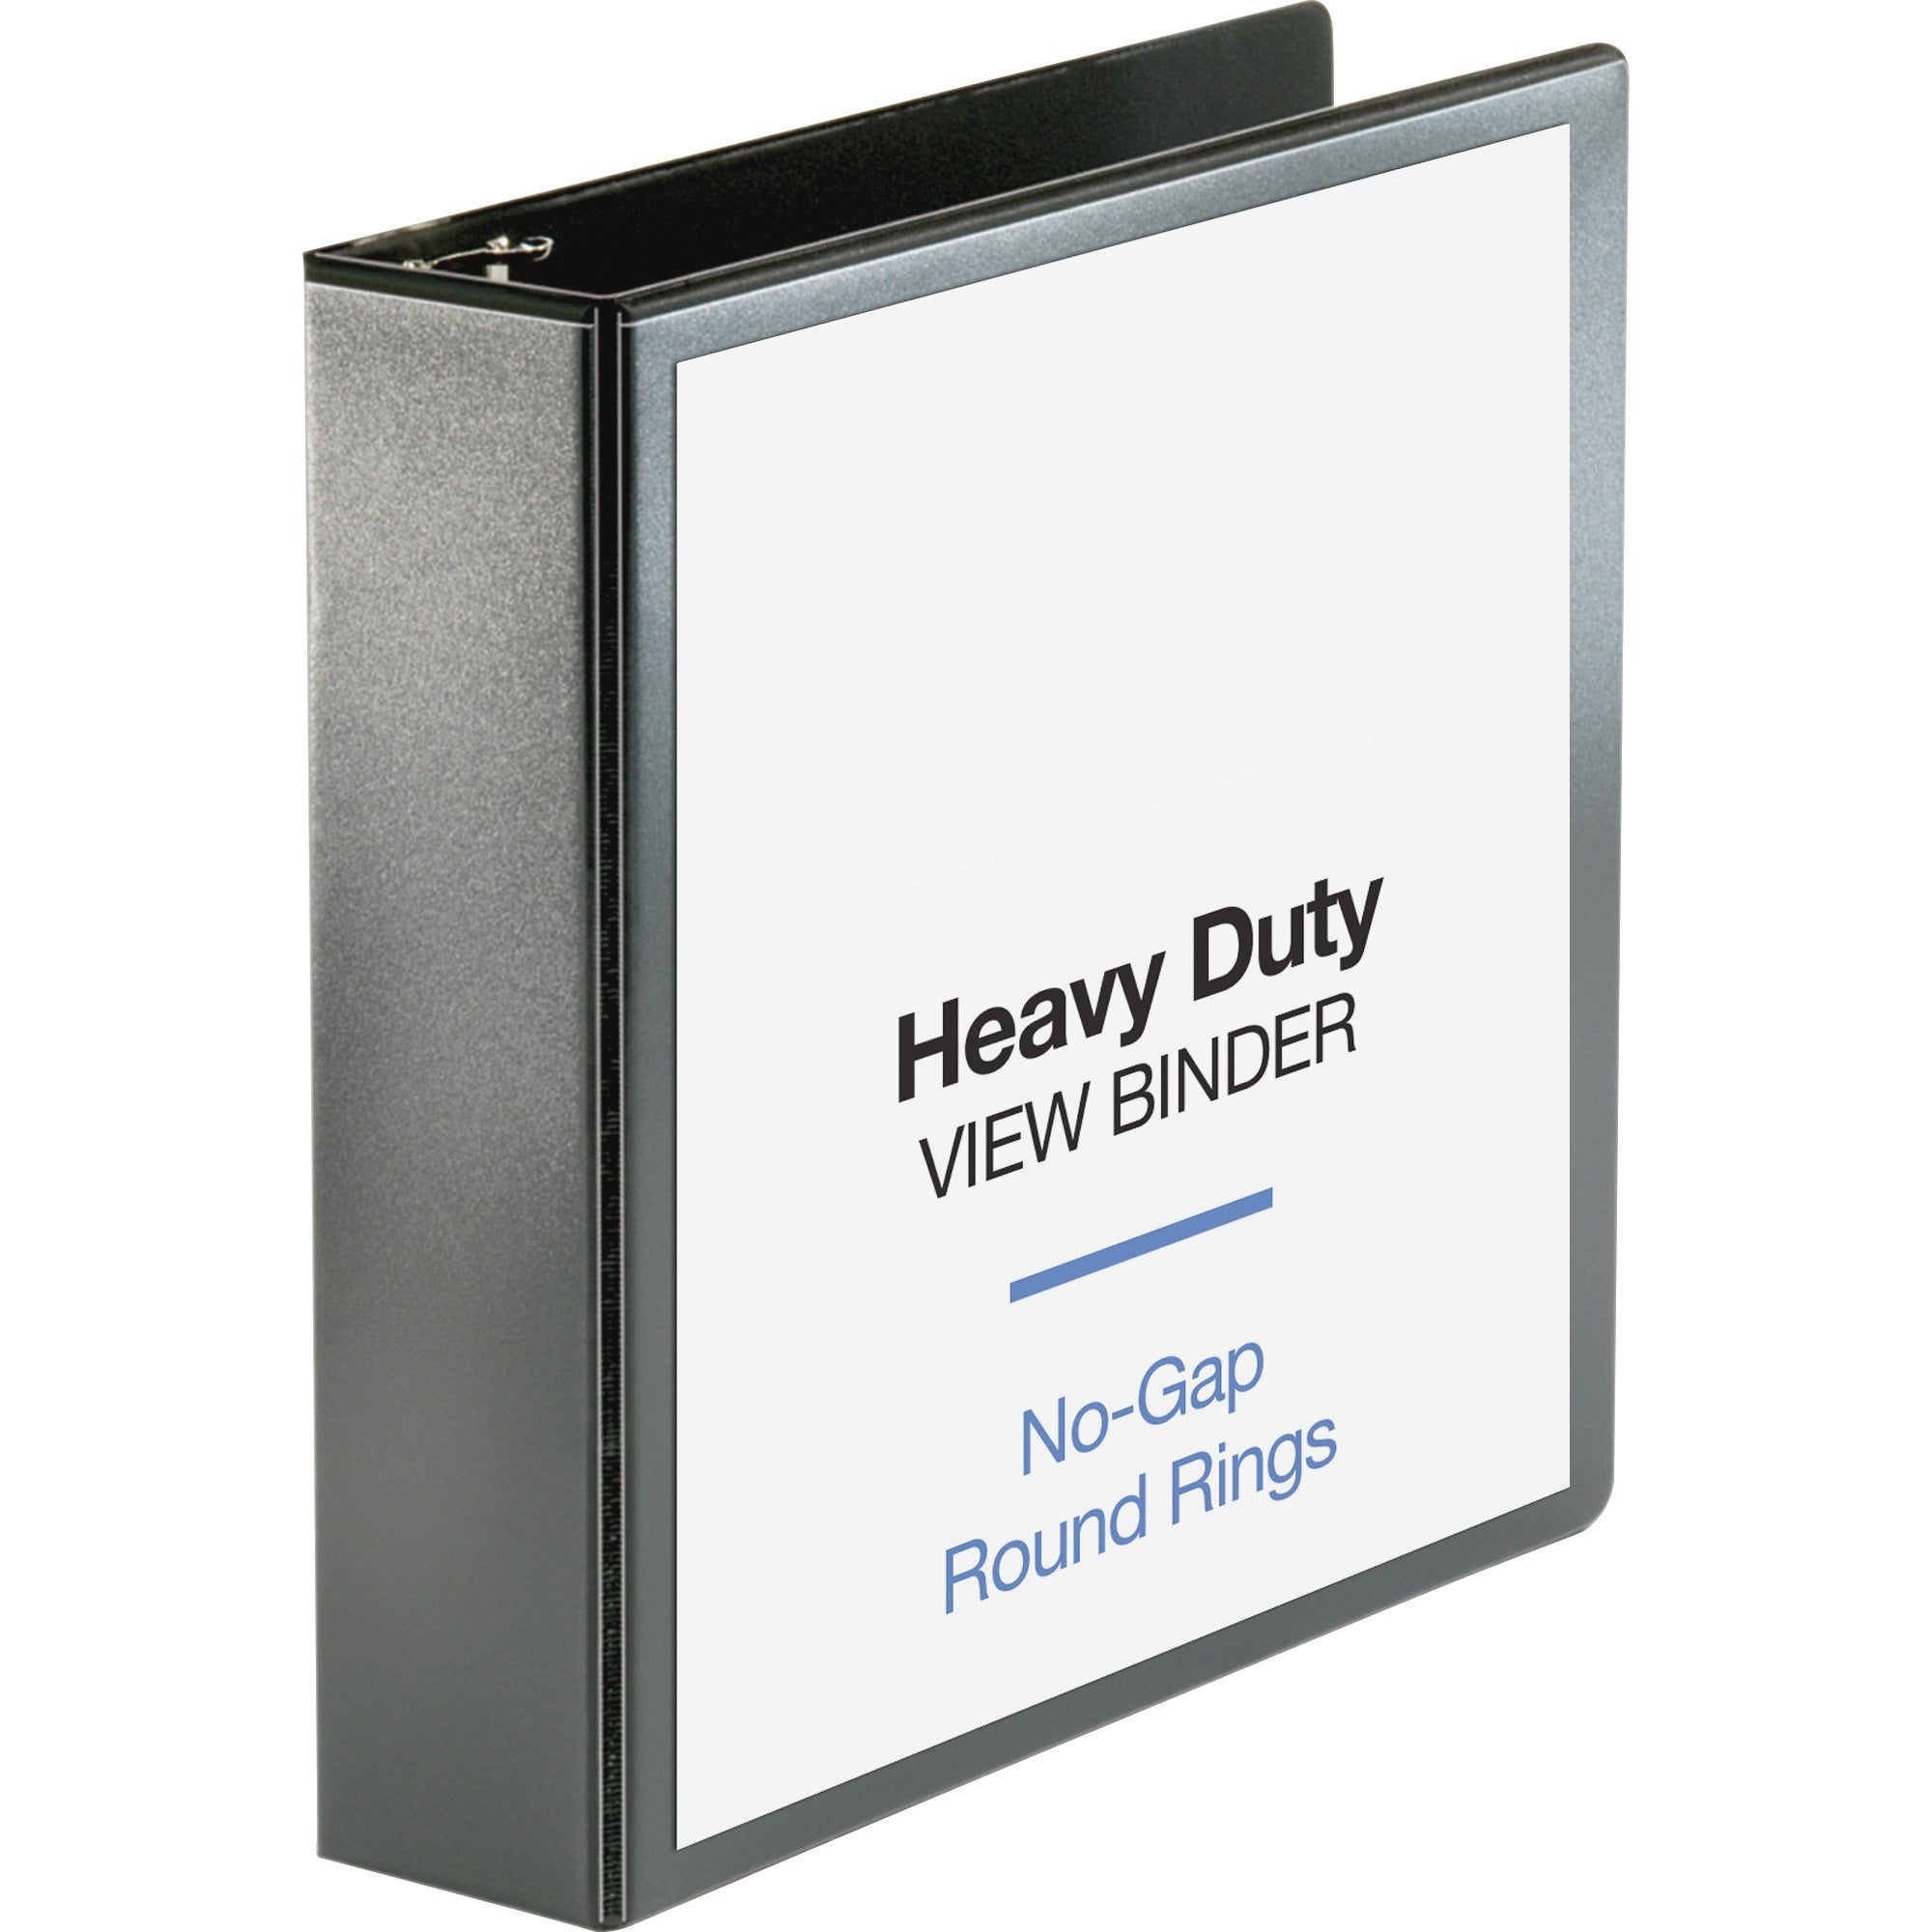 business-source-heavy-duty-view-binder-2-binder-capacity-letter-8-1-2-x-11-sheet-size-475-sheet-capacity-round-ring-fasteners-2-internal-pockets-polypropylene-covered-chipboard-black-non-glare-clear-overlay-gap-free-ring-d_bsn68020 - 1